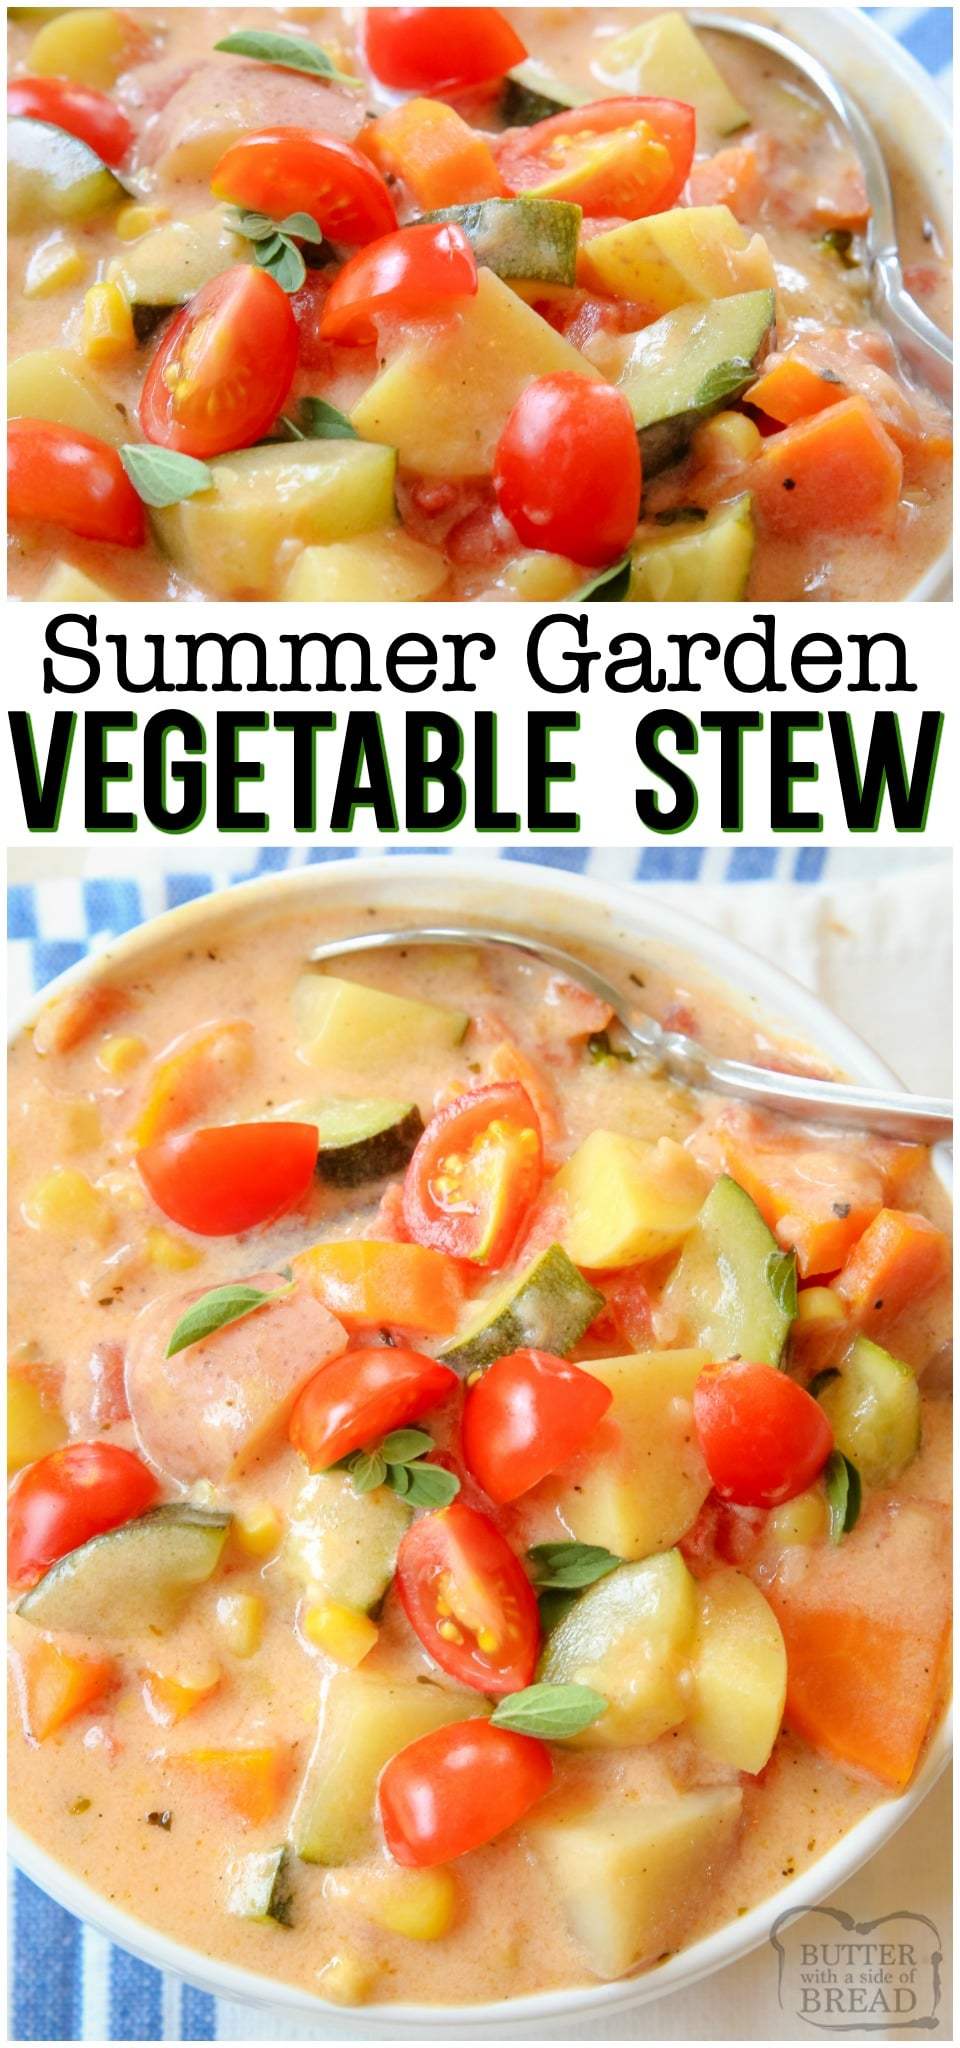 Summer Vegetable Stew is delicious, with tomatoes, zucchini, carrots and more. Fresh flavors perfect for a weeknight summer meal when the garden is overflowing. #garden #vegetable #stew #soup #freshvegetables #veggies #healthy #dinner #recipe from BUTTER WITH A SIDE OF BREAD